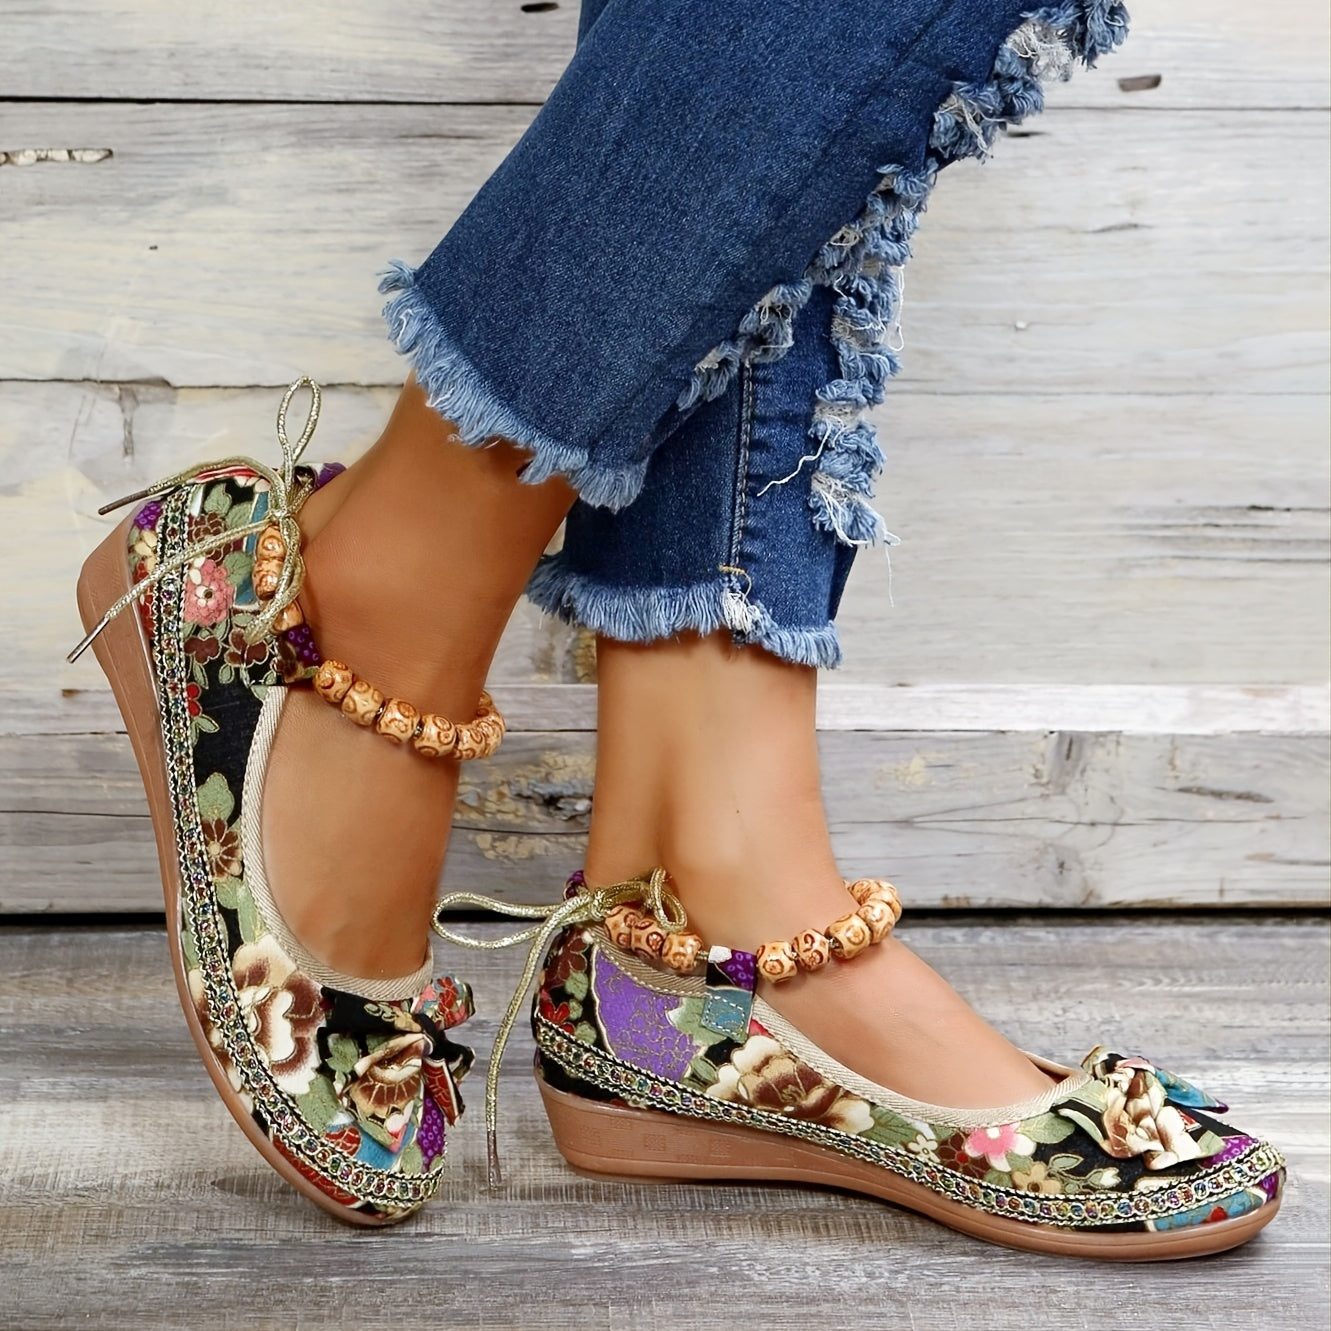 「lovevop」Women's Stylish Floral Print Slip-Ons - Ethnic Ankle Strap Flat Shoes for Casual Walks